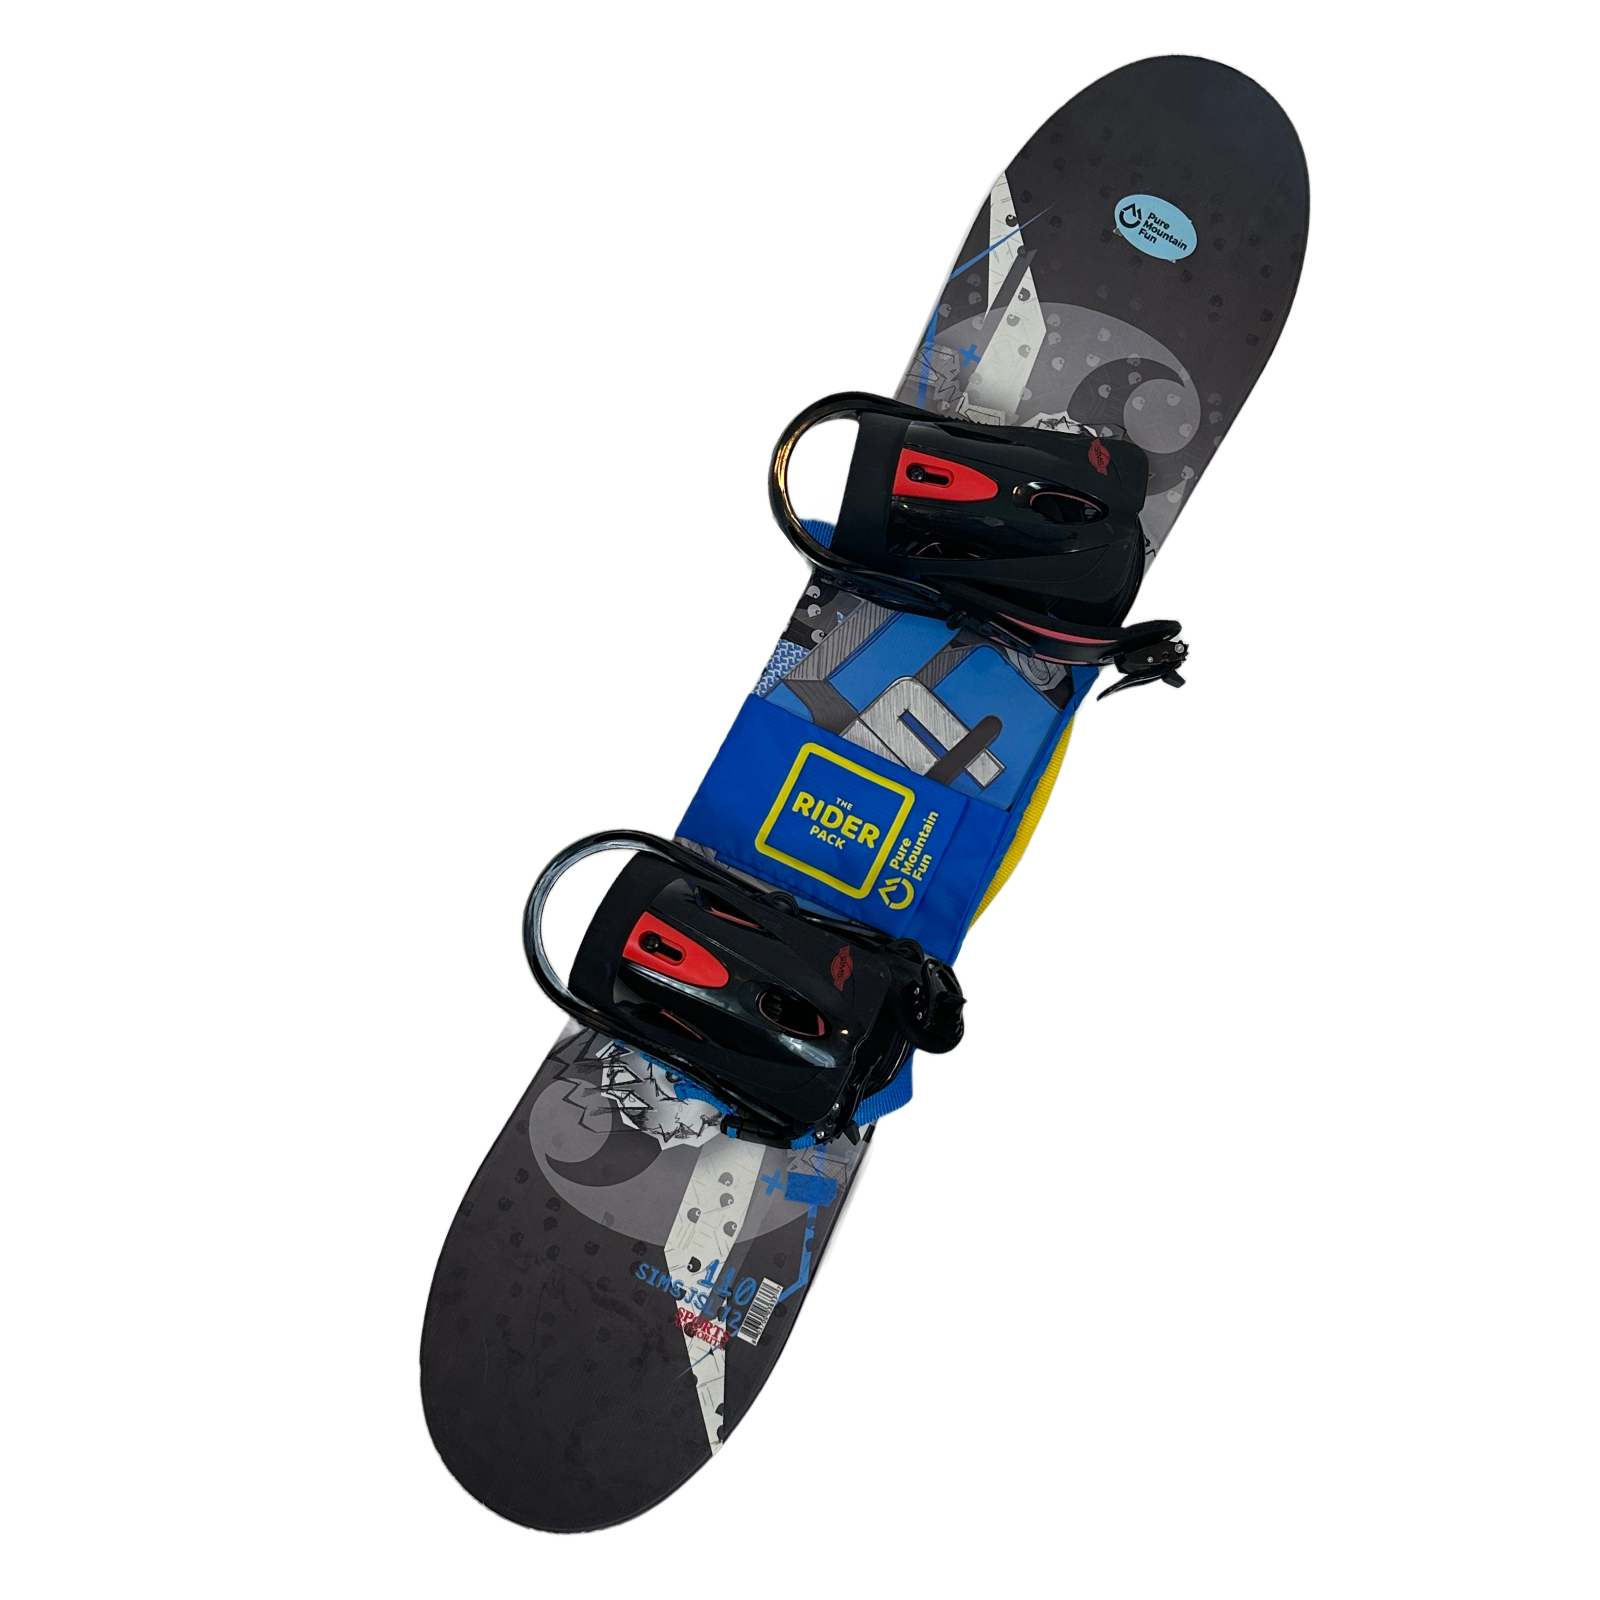 Image of Rider Pack on a snowboard,  Bottom strap connects under lower binding.  Top strap goes through the top binding